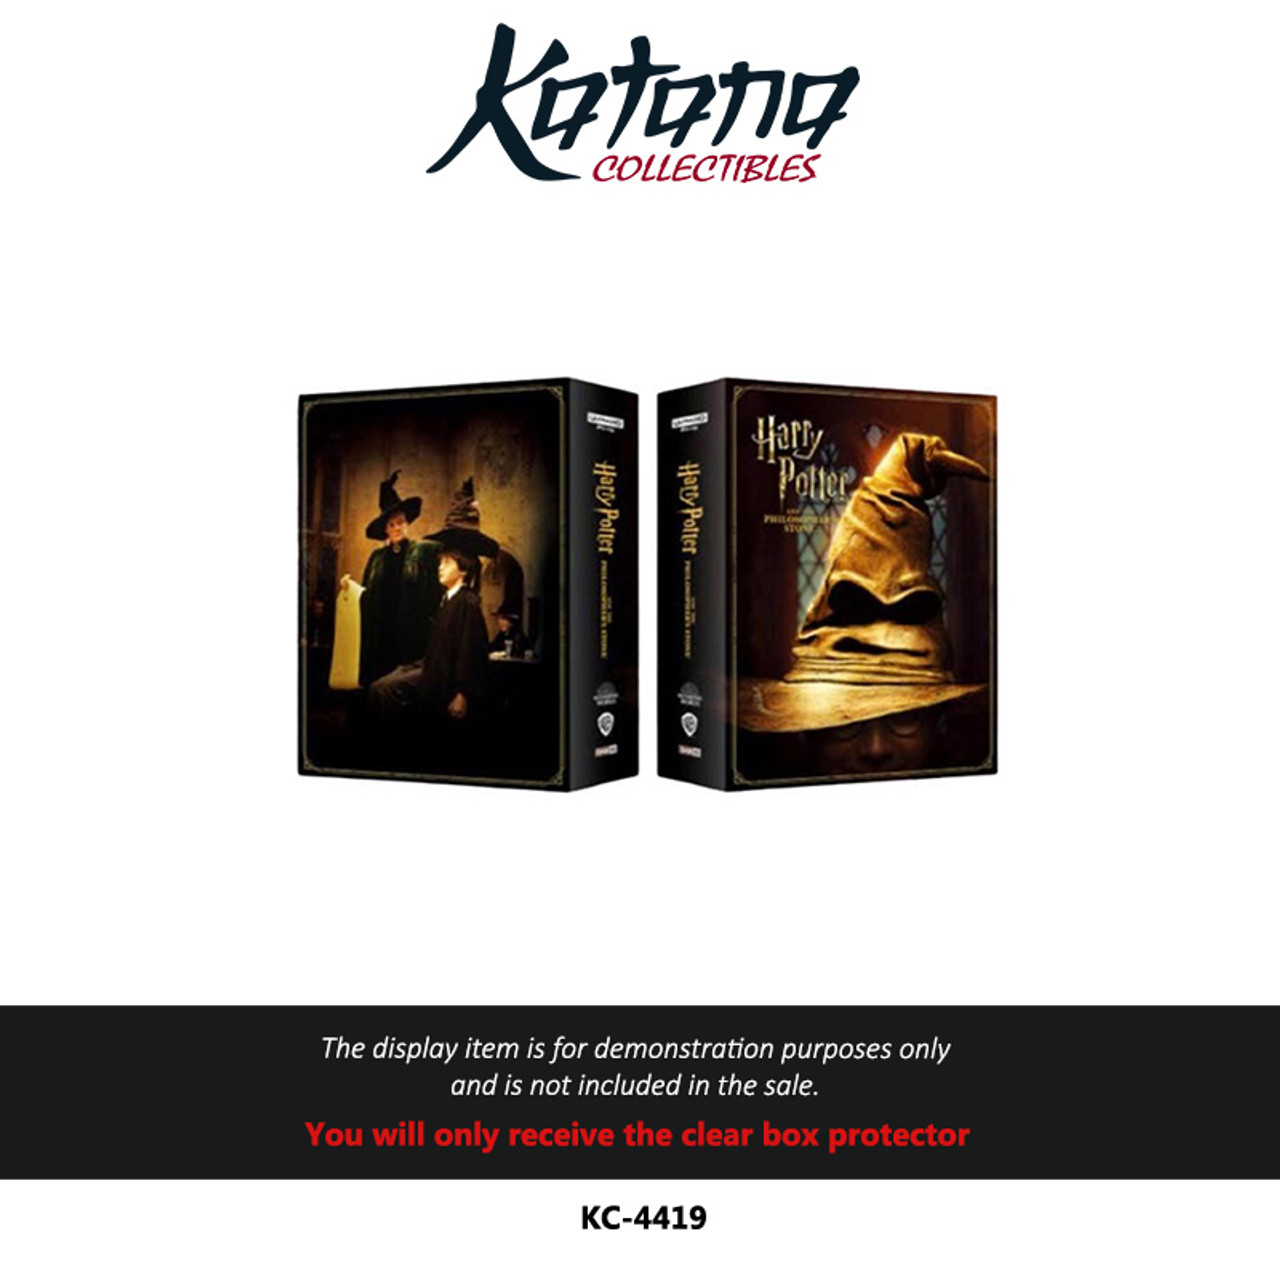 Katana Collectibles Protector For Harry Potter and the Philosopher's Stones Blufan Steelbook